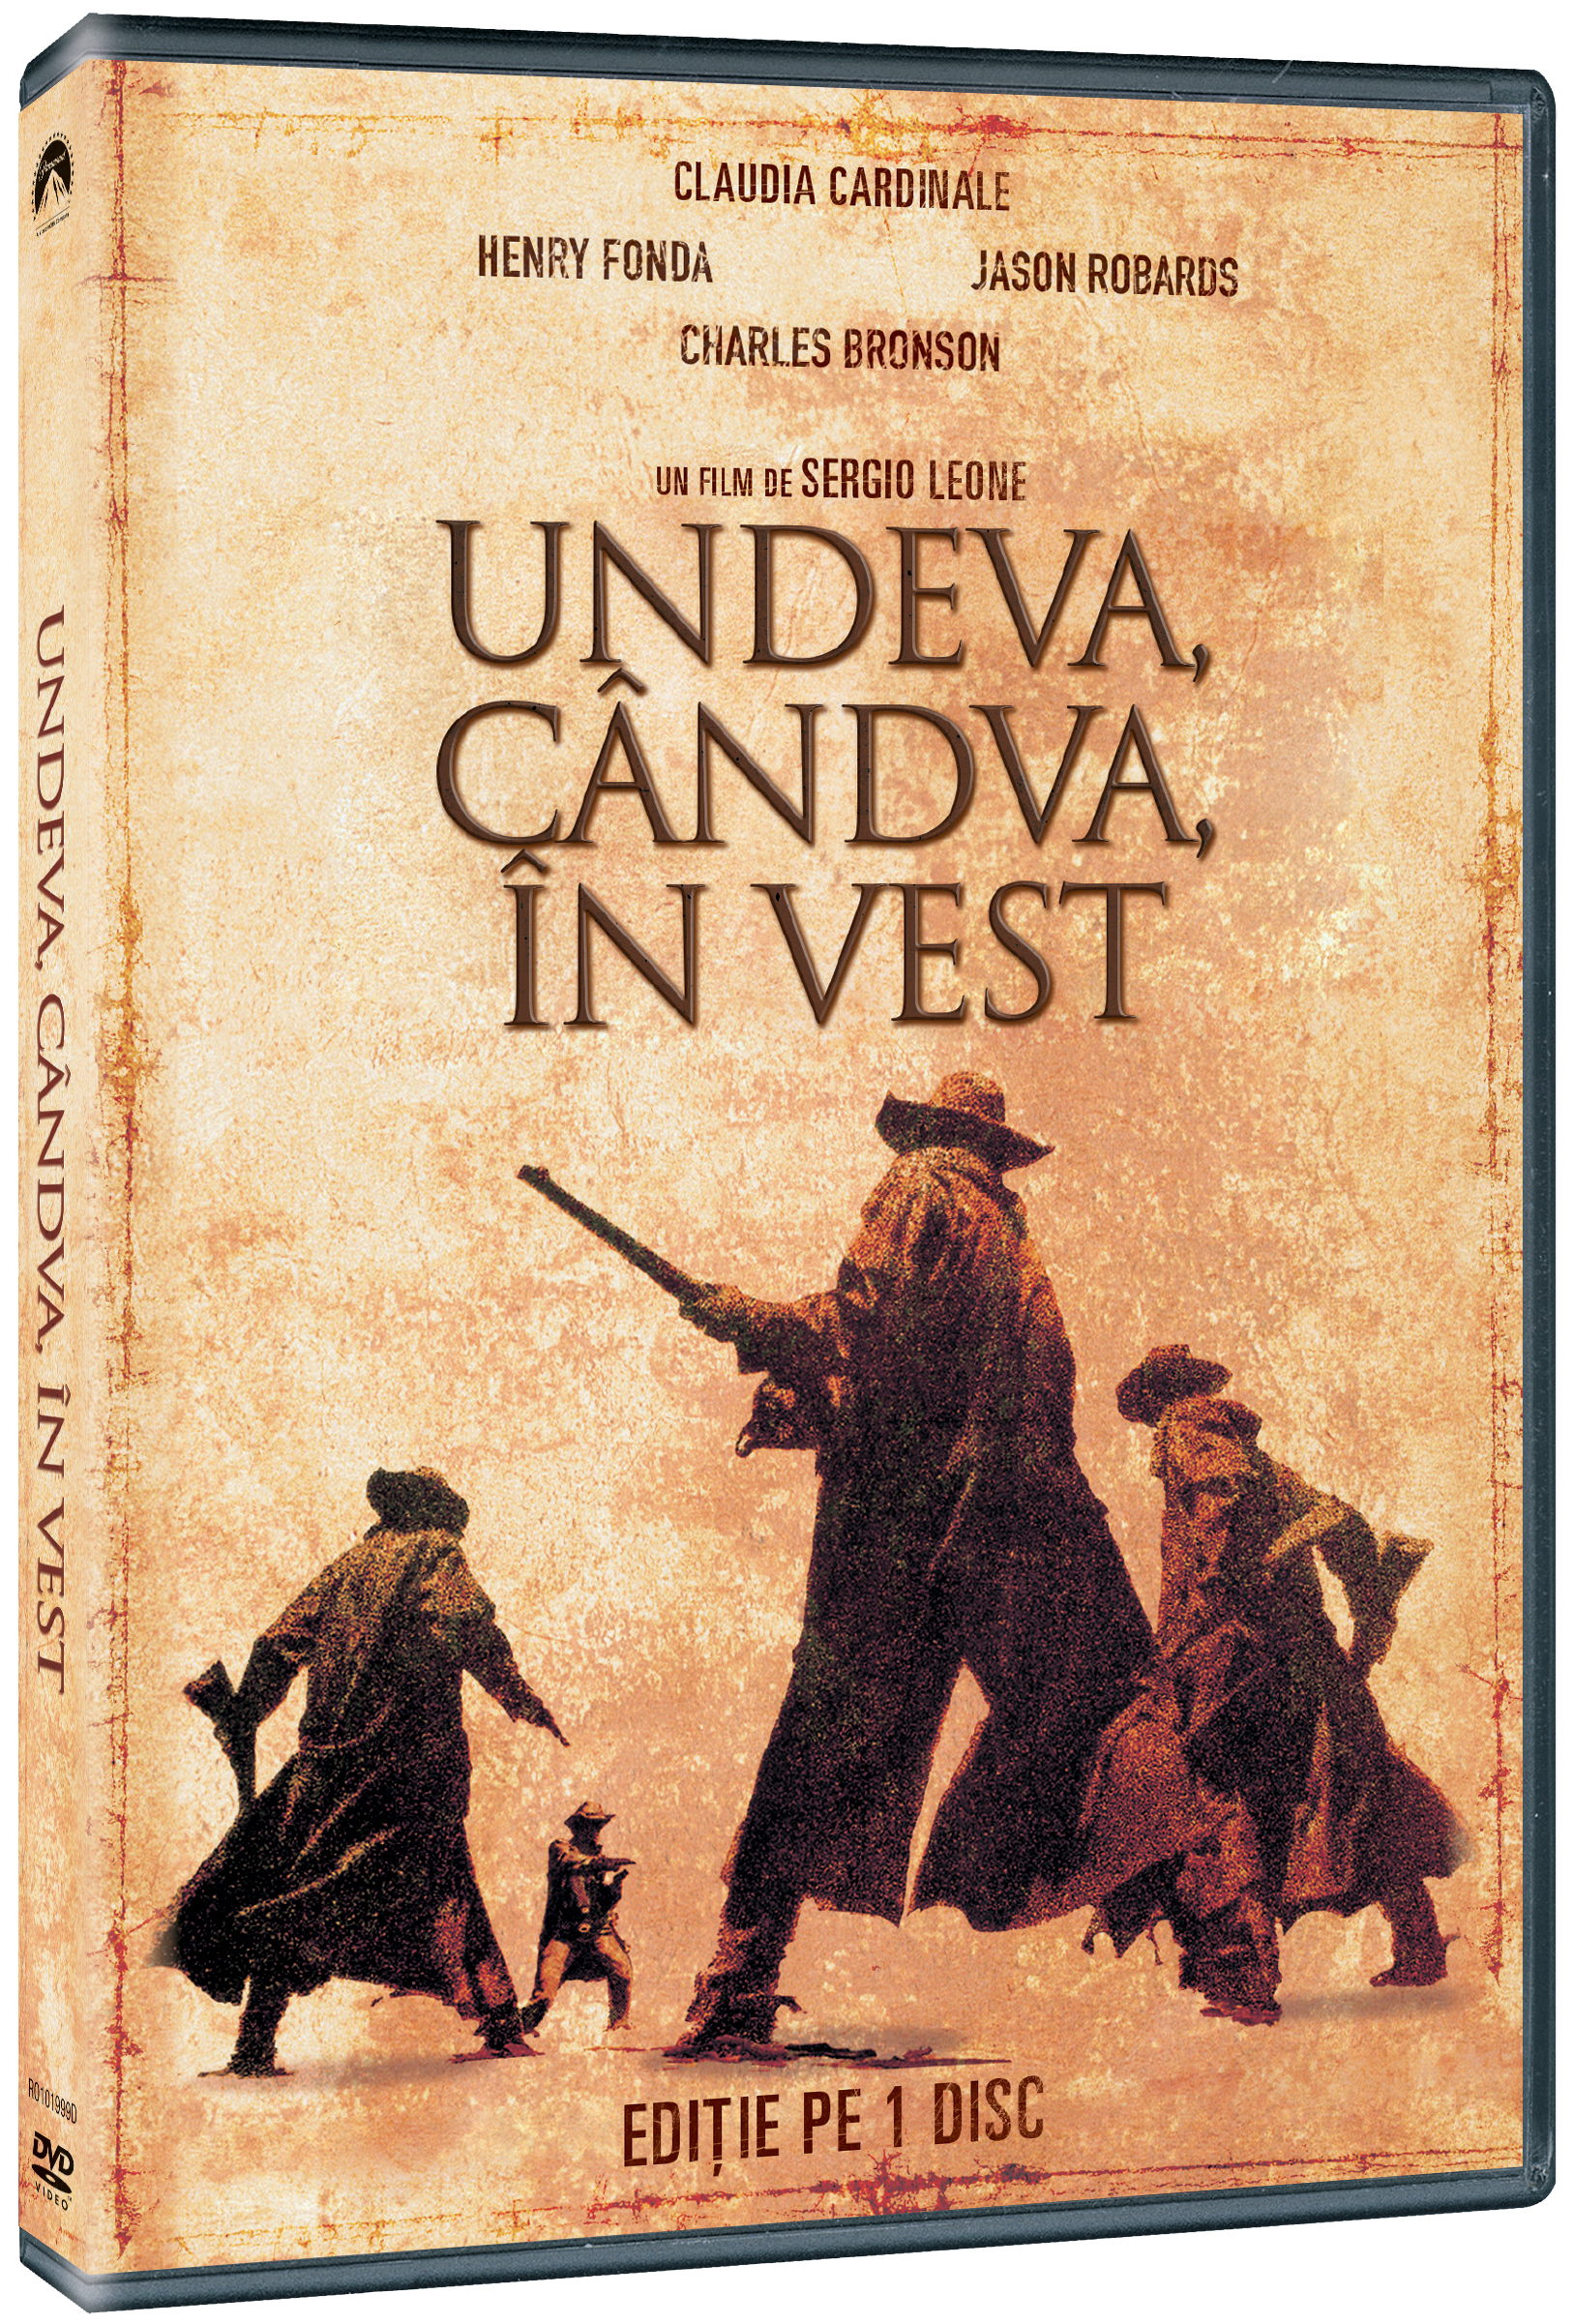 Undeva, candva in Vest / Once Upon a Time in the West | Sergio Leone